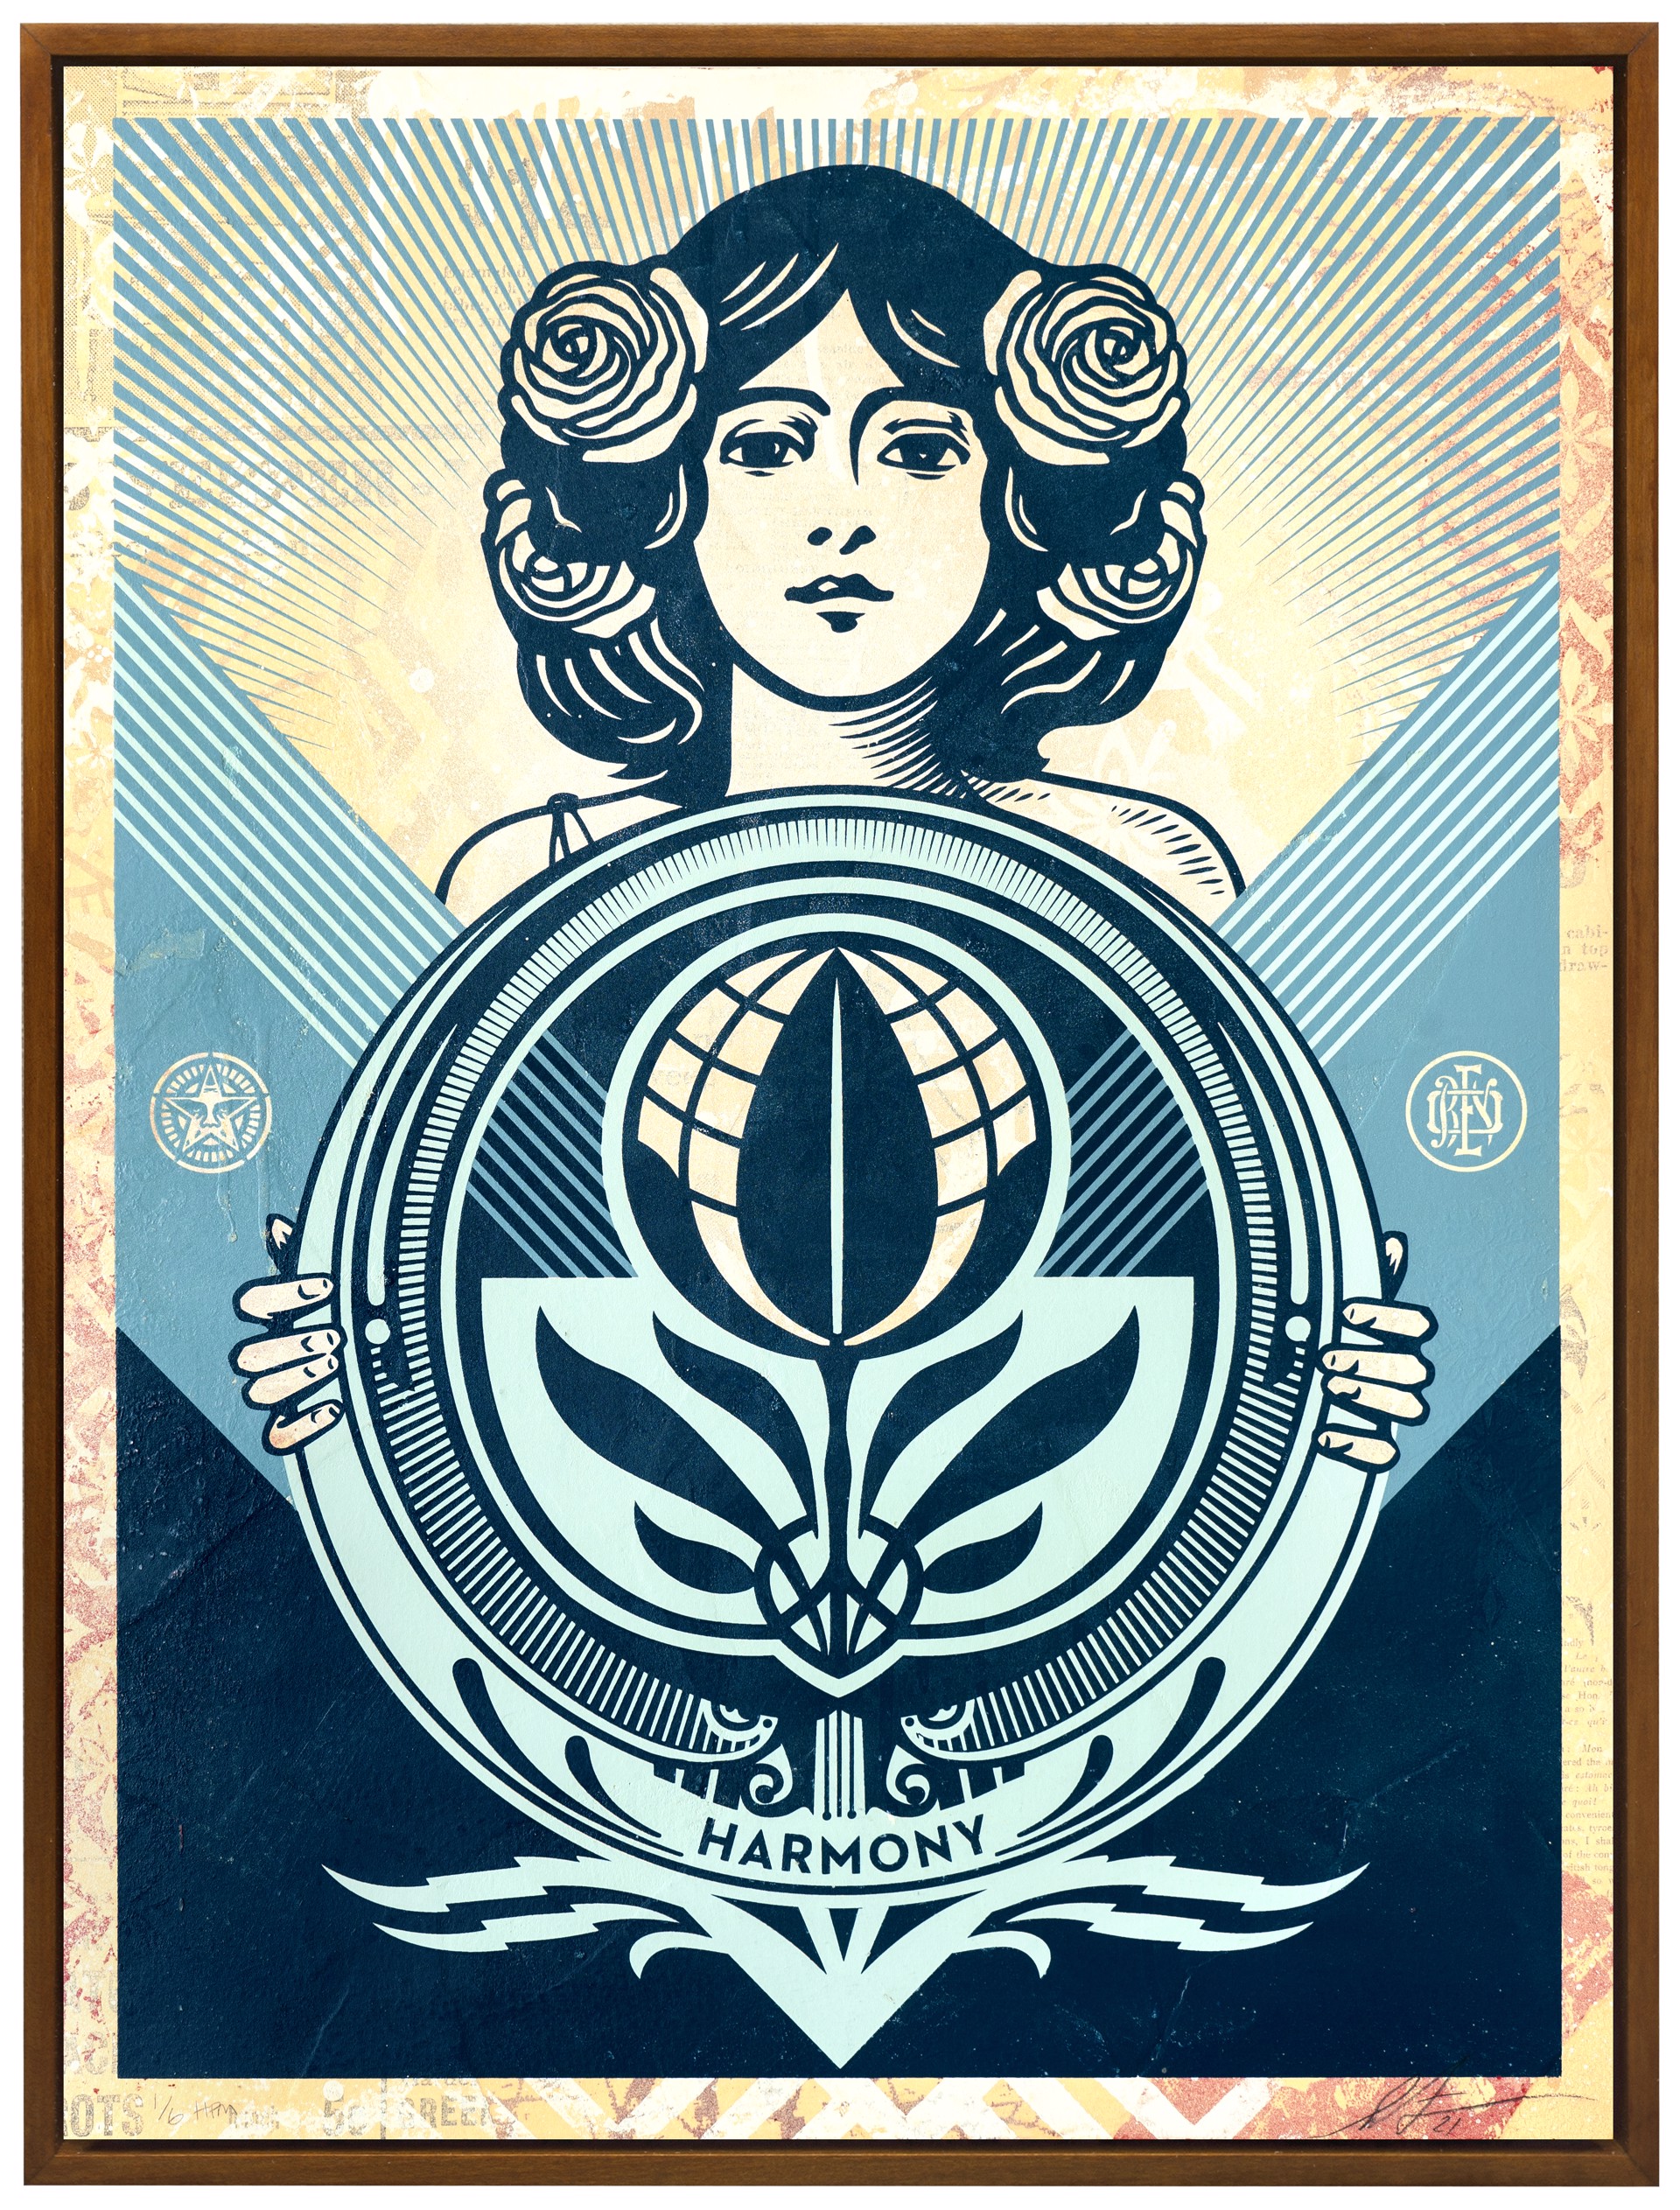 Protect Biodiversity-Cultivate Harmony by Shepard Fairey / Limited editions